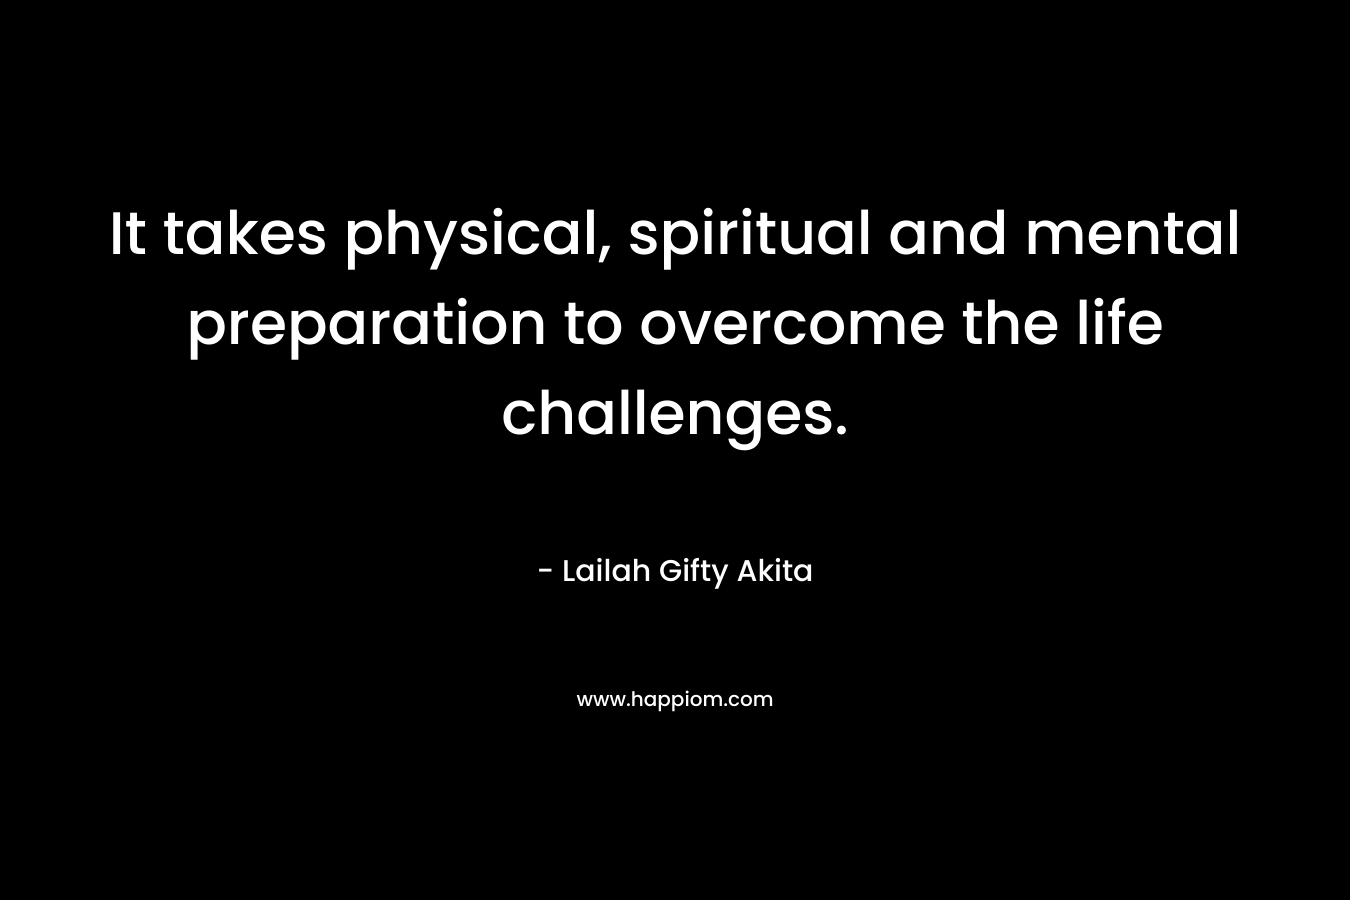 It takes physical, spiritual and mental preparation to overcome the life challenges.